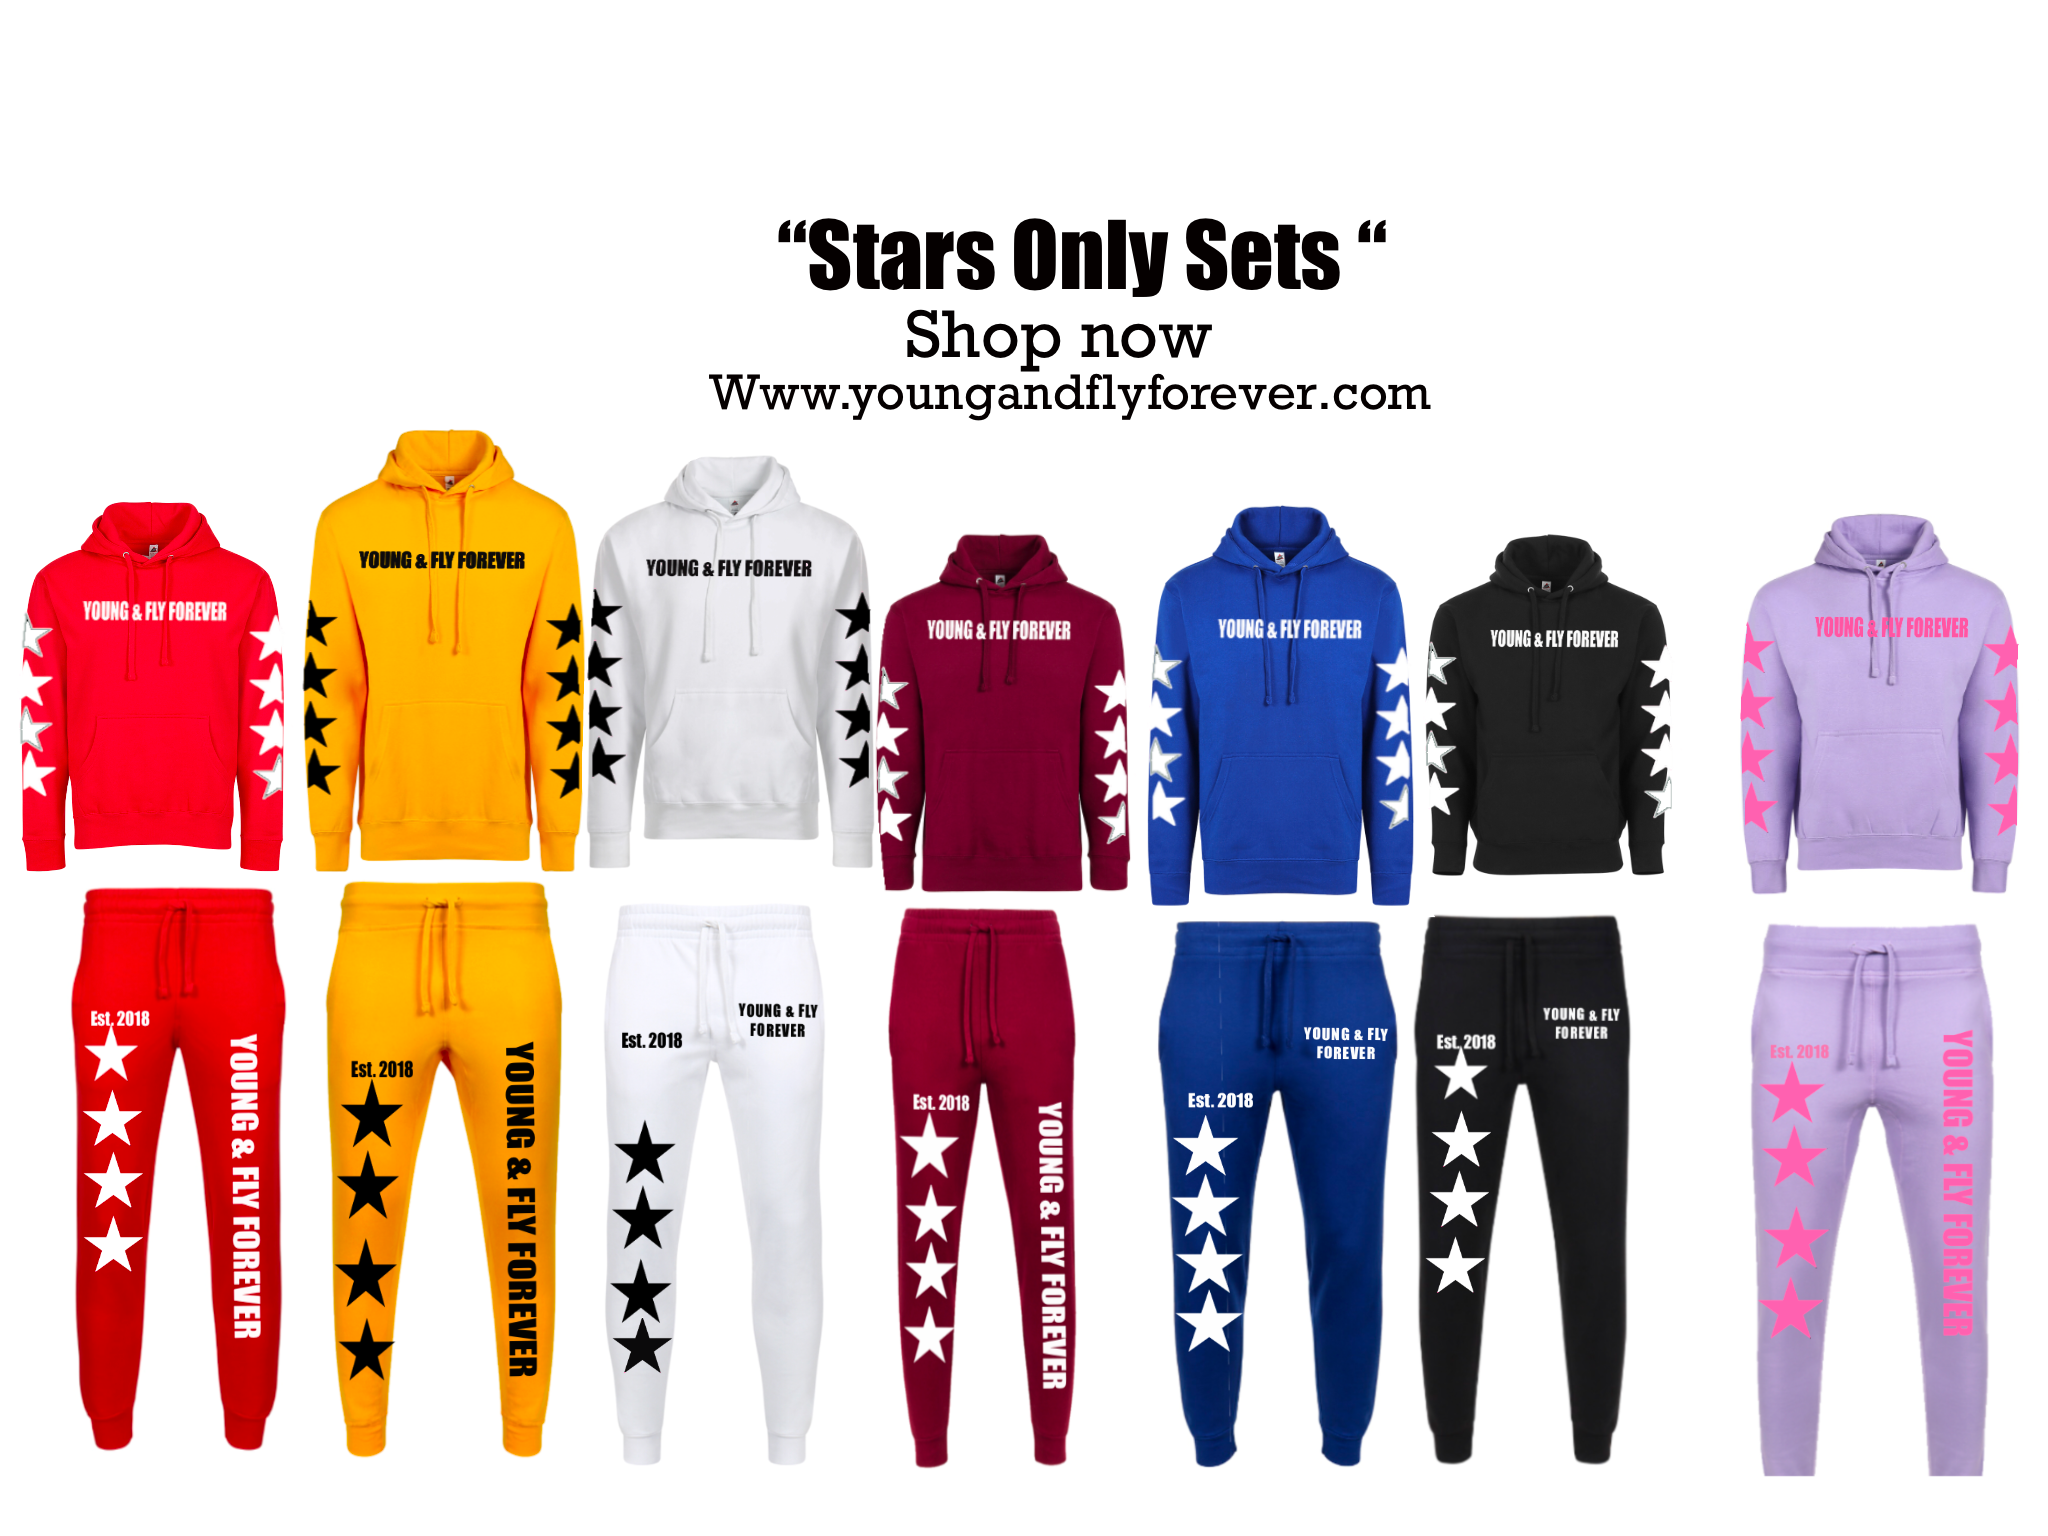 Newest “Stars only” sets